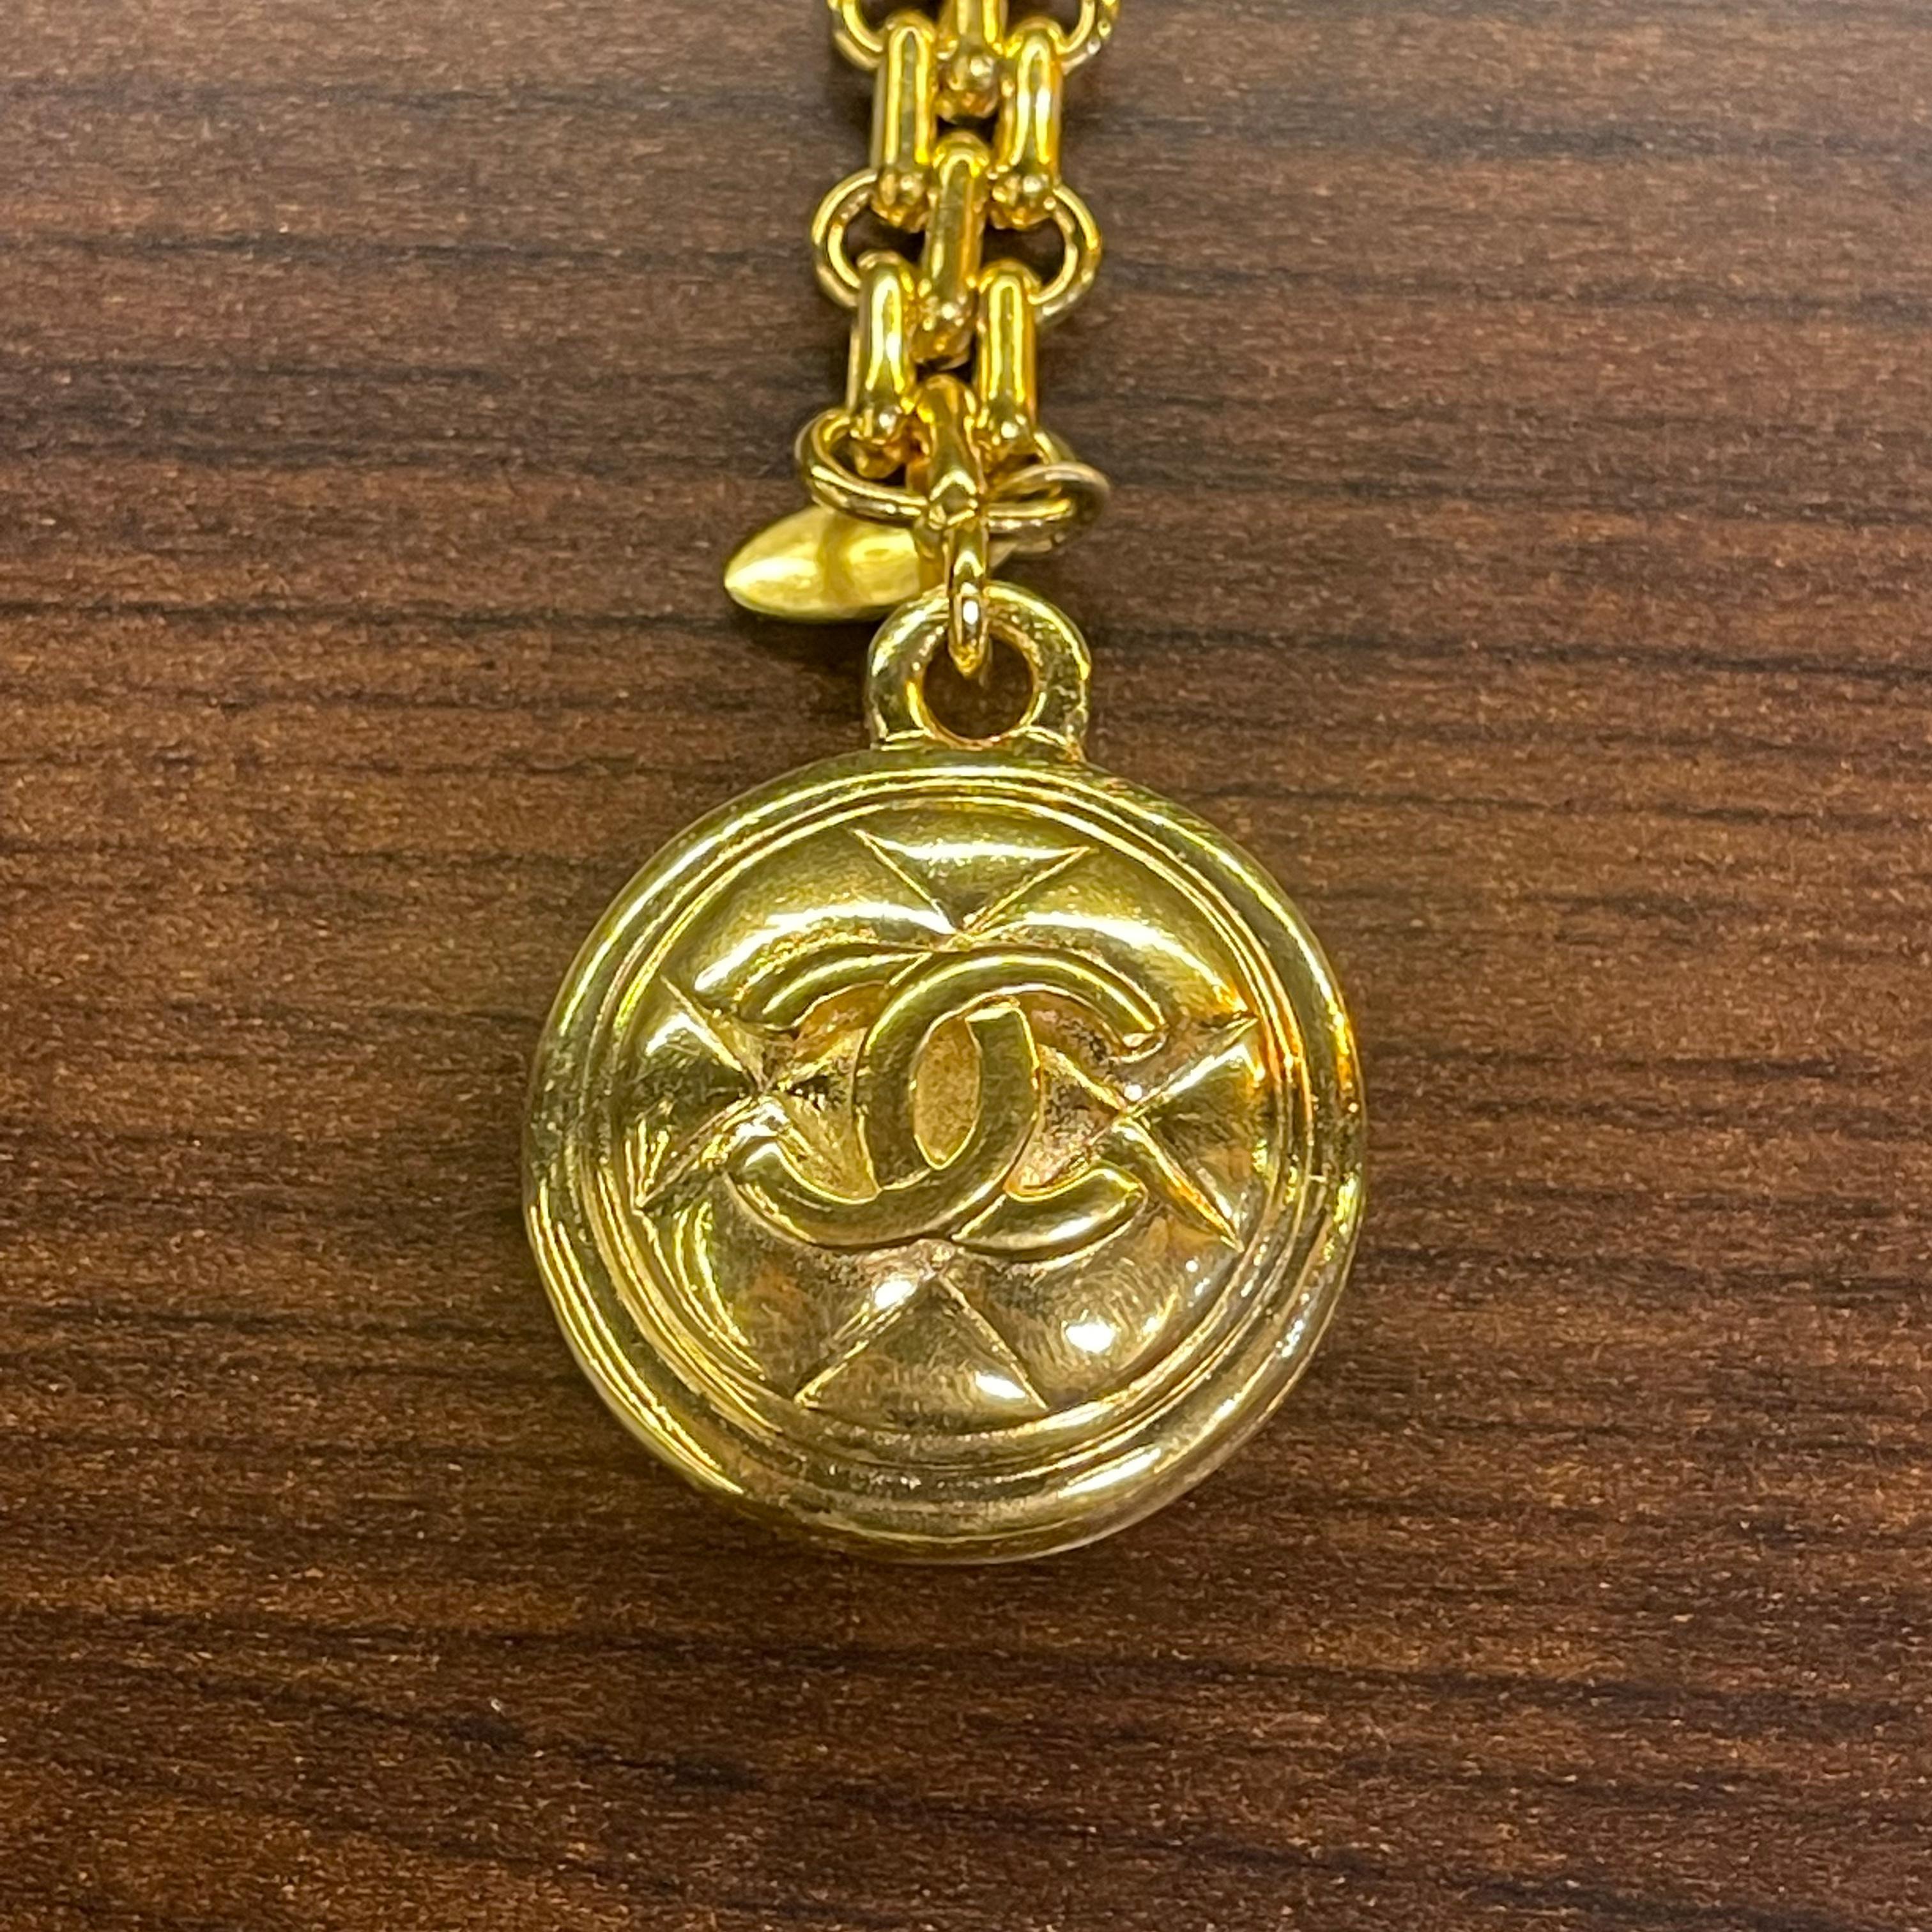 Beautiful chanel gold bag charm. Diameter 3 cm. Charm only. Overall very good condition. Example of usage on bags on the picture reference.